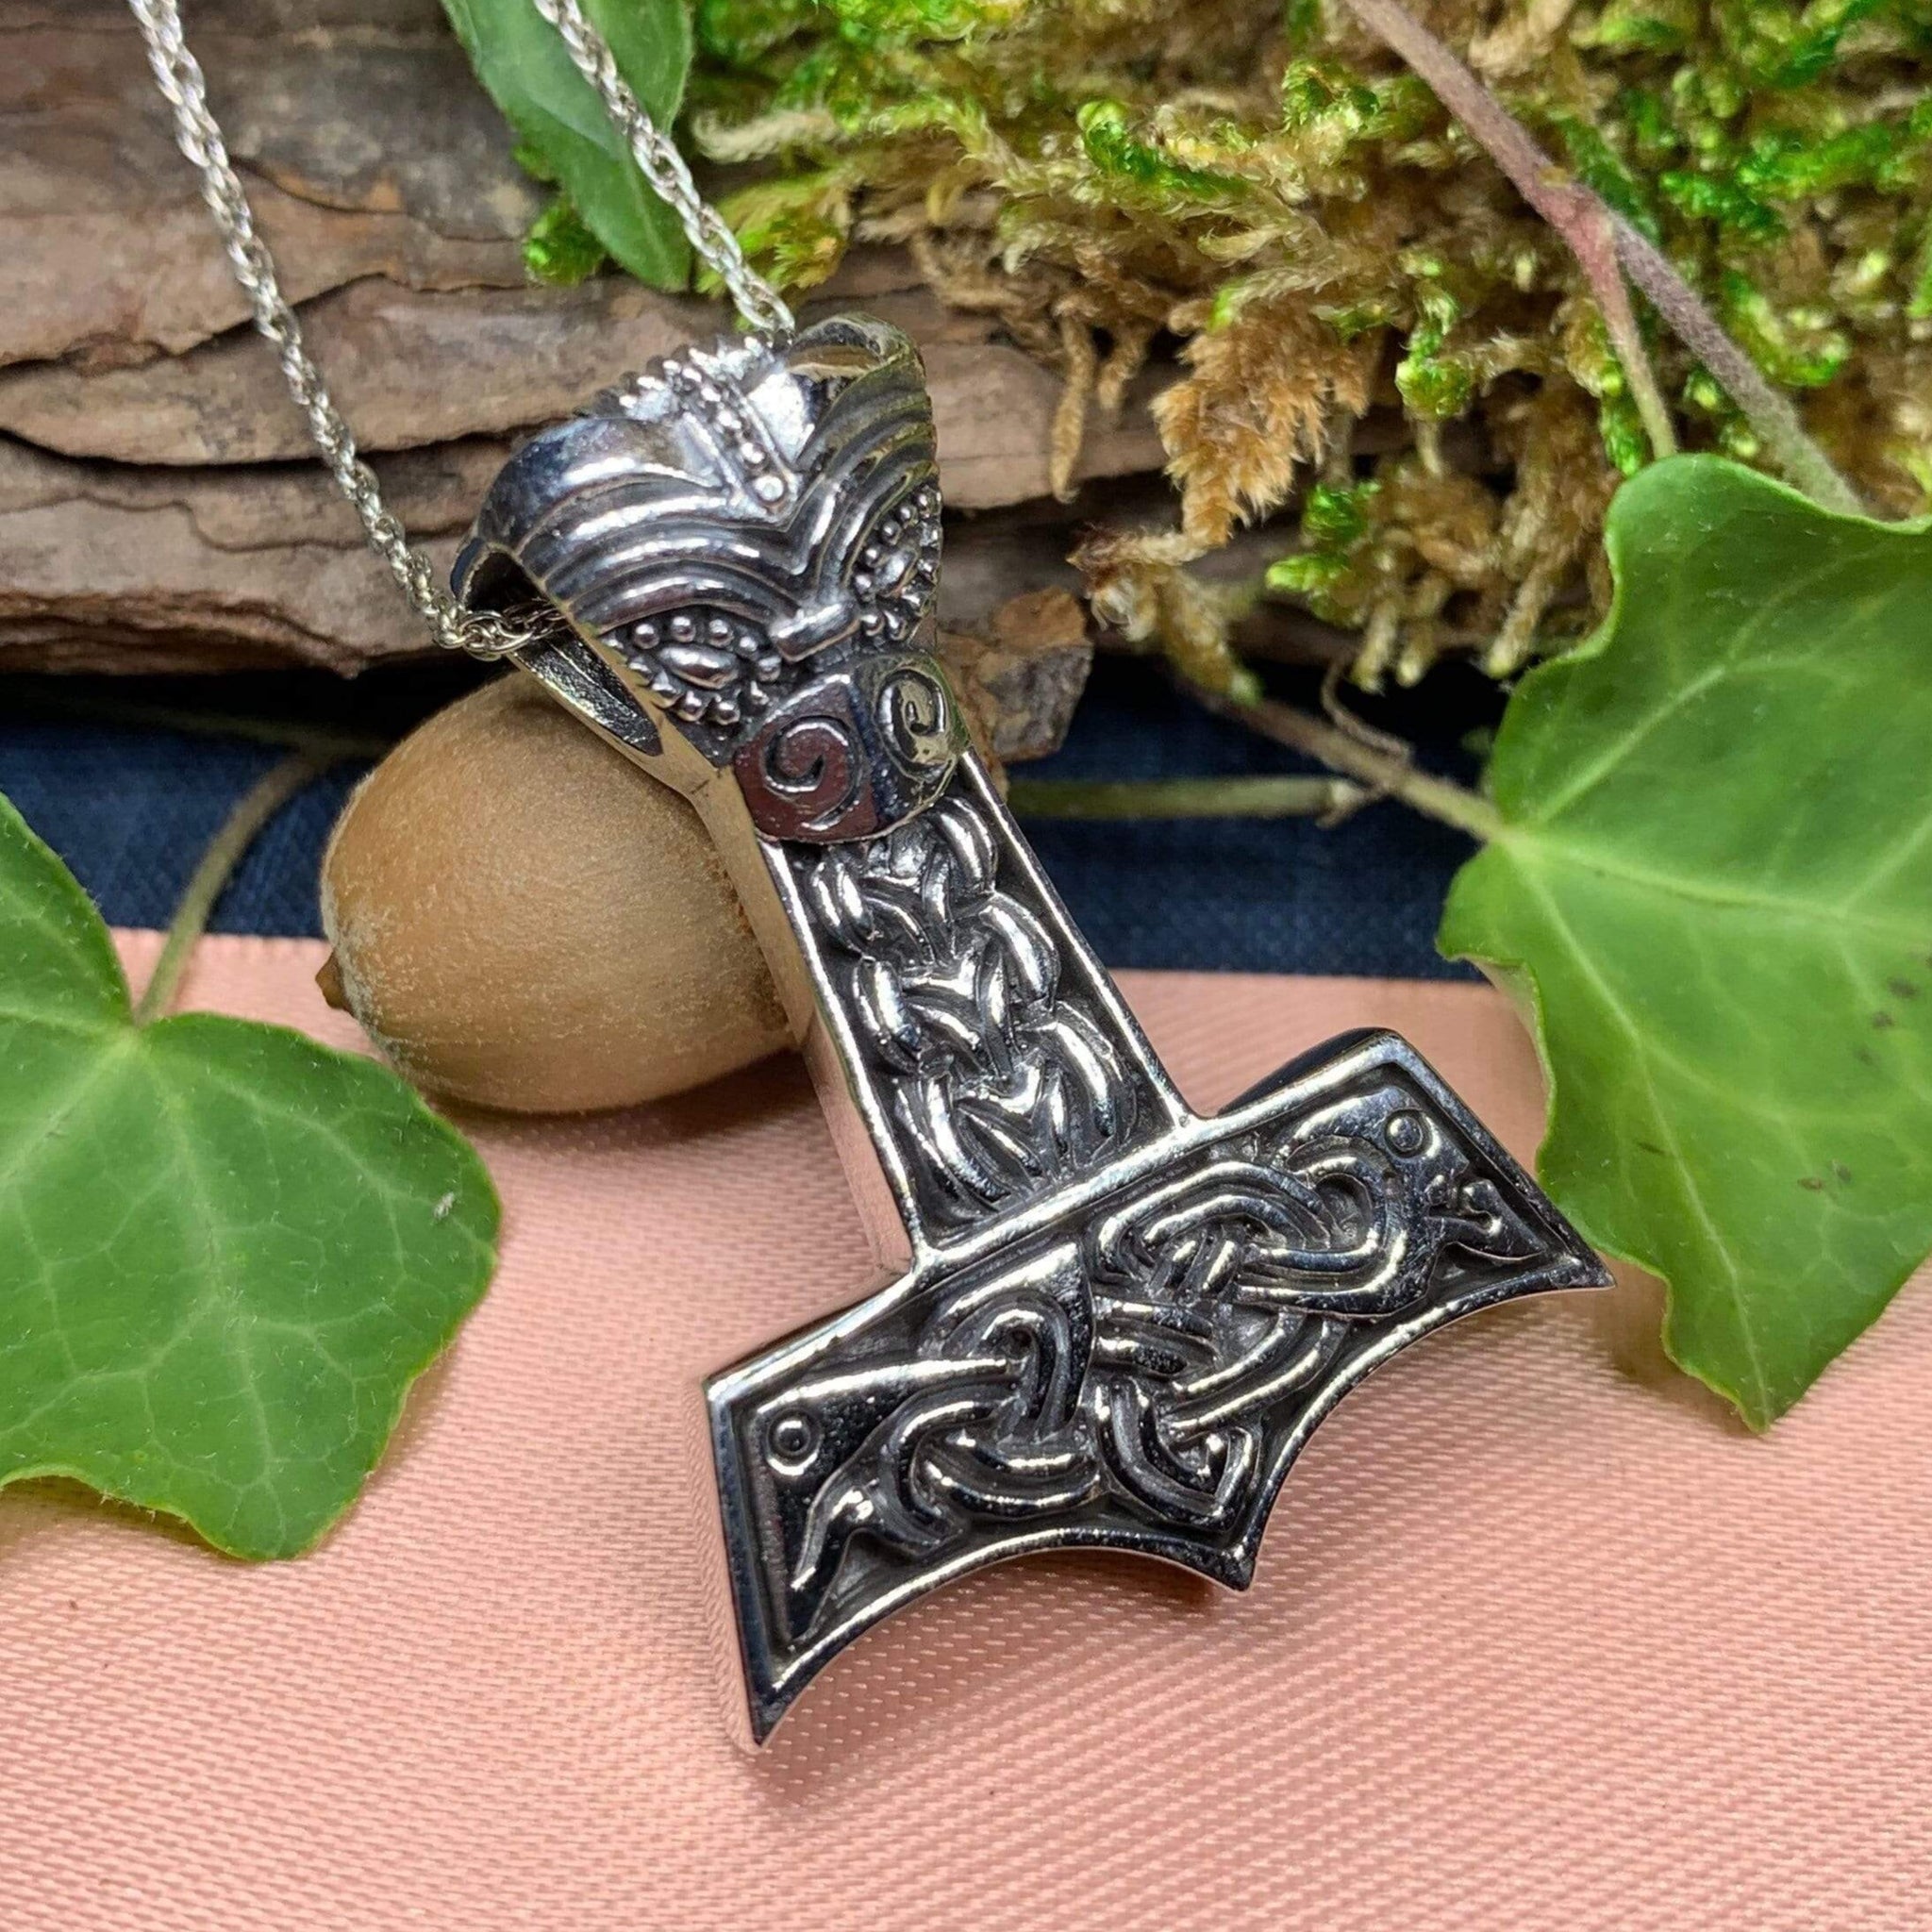 Thor's Hammer Necklace with Dragon Knots Sterling Silver - Northlord